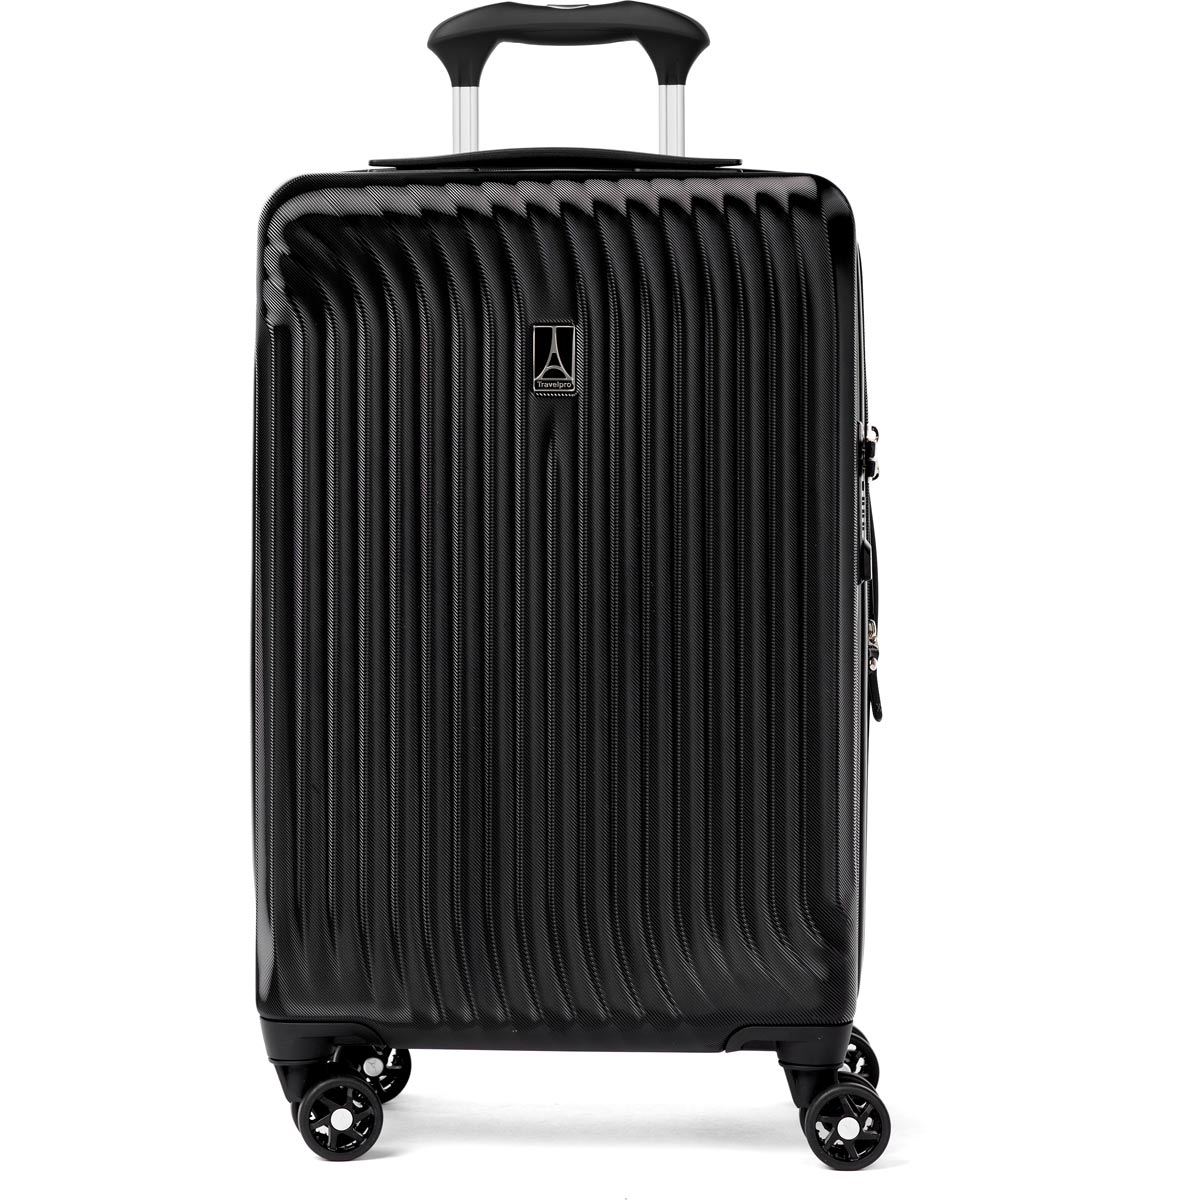 Travelpro Maxlite Air Carry-On Expandable Hardside Spinner Luggage in Metallic Silver